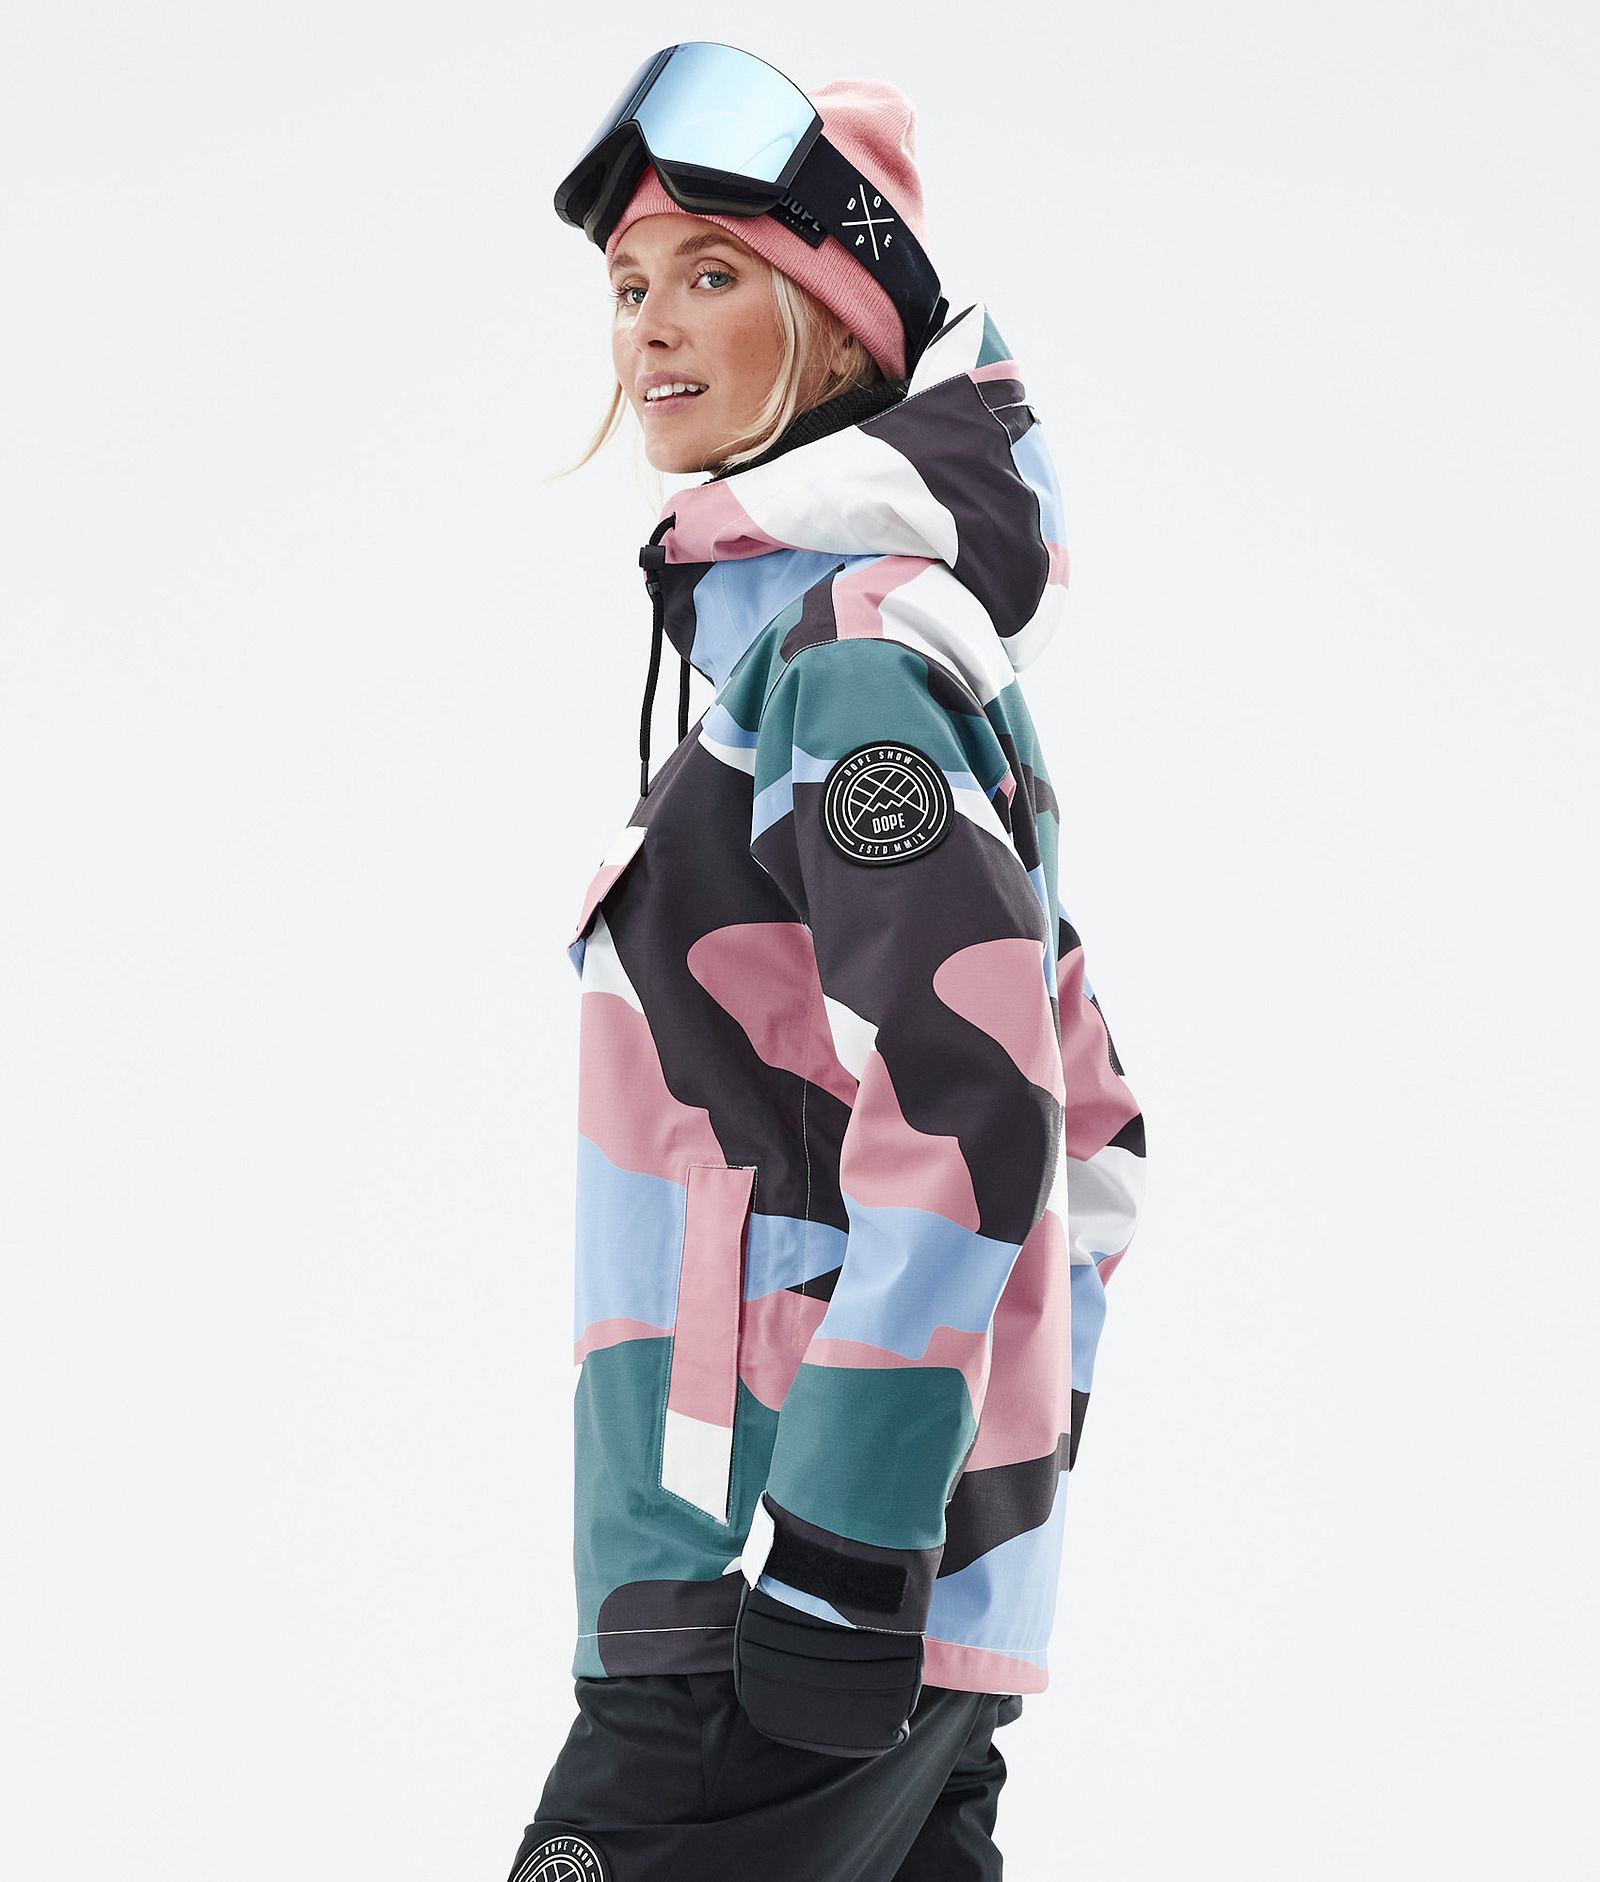 Blizzard W 2022 Giacca Snowboard Donna Shards Light Blue Muted Pink, Immagine 6 di 9